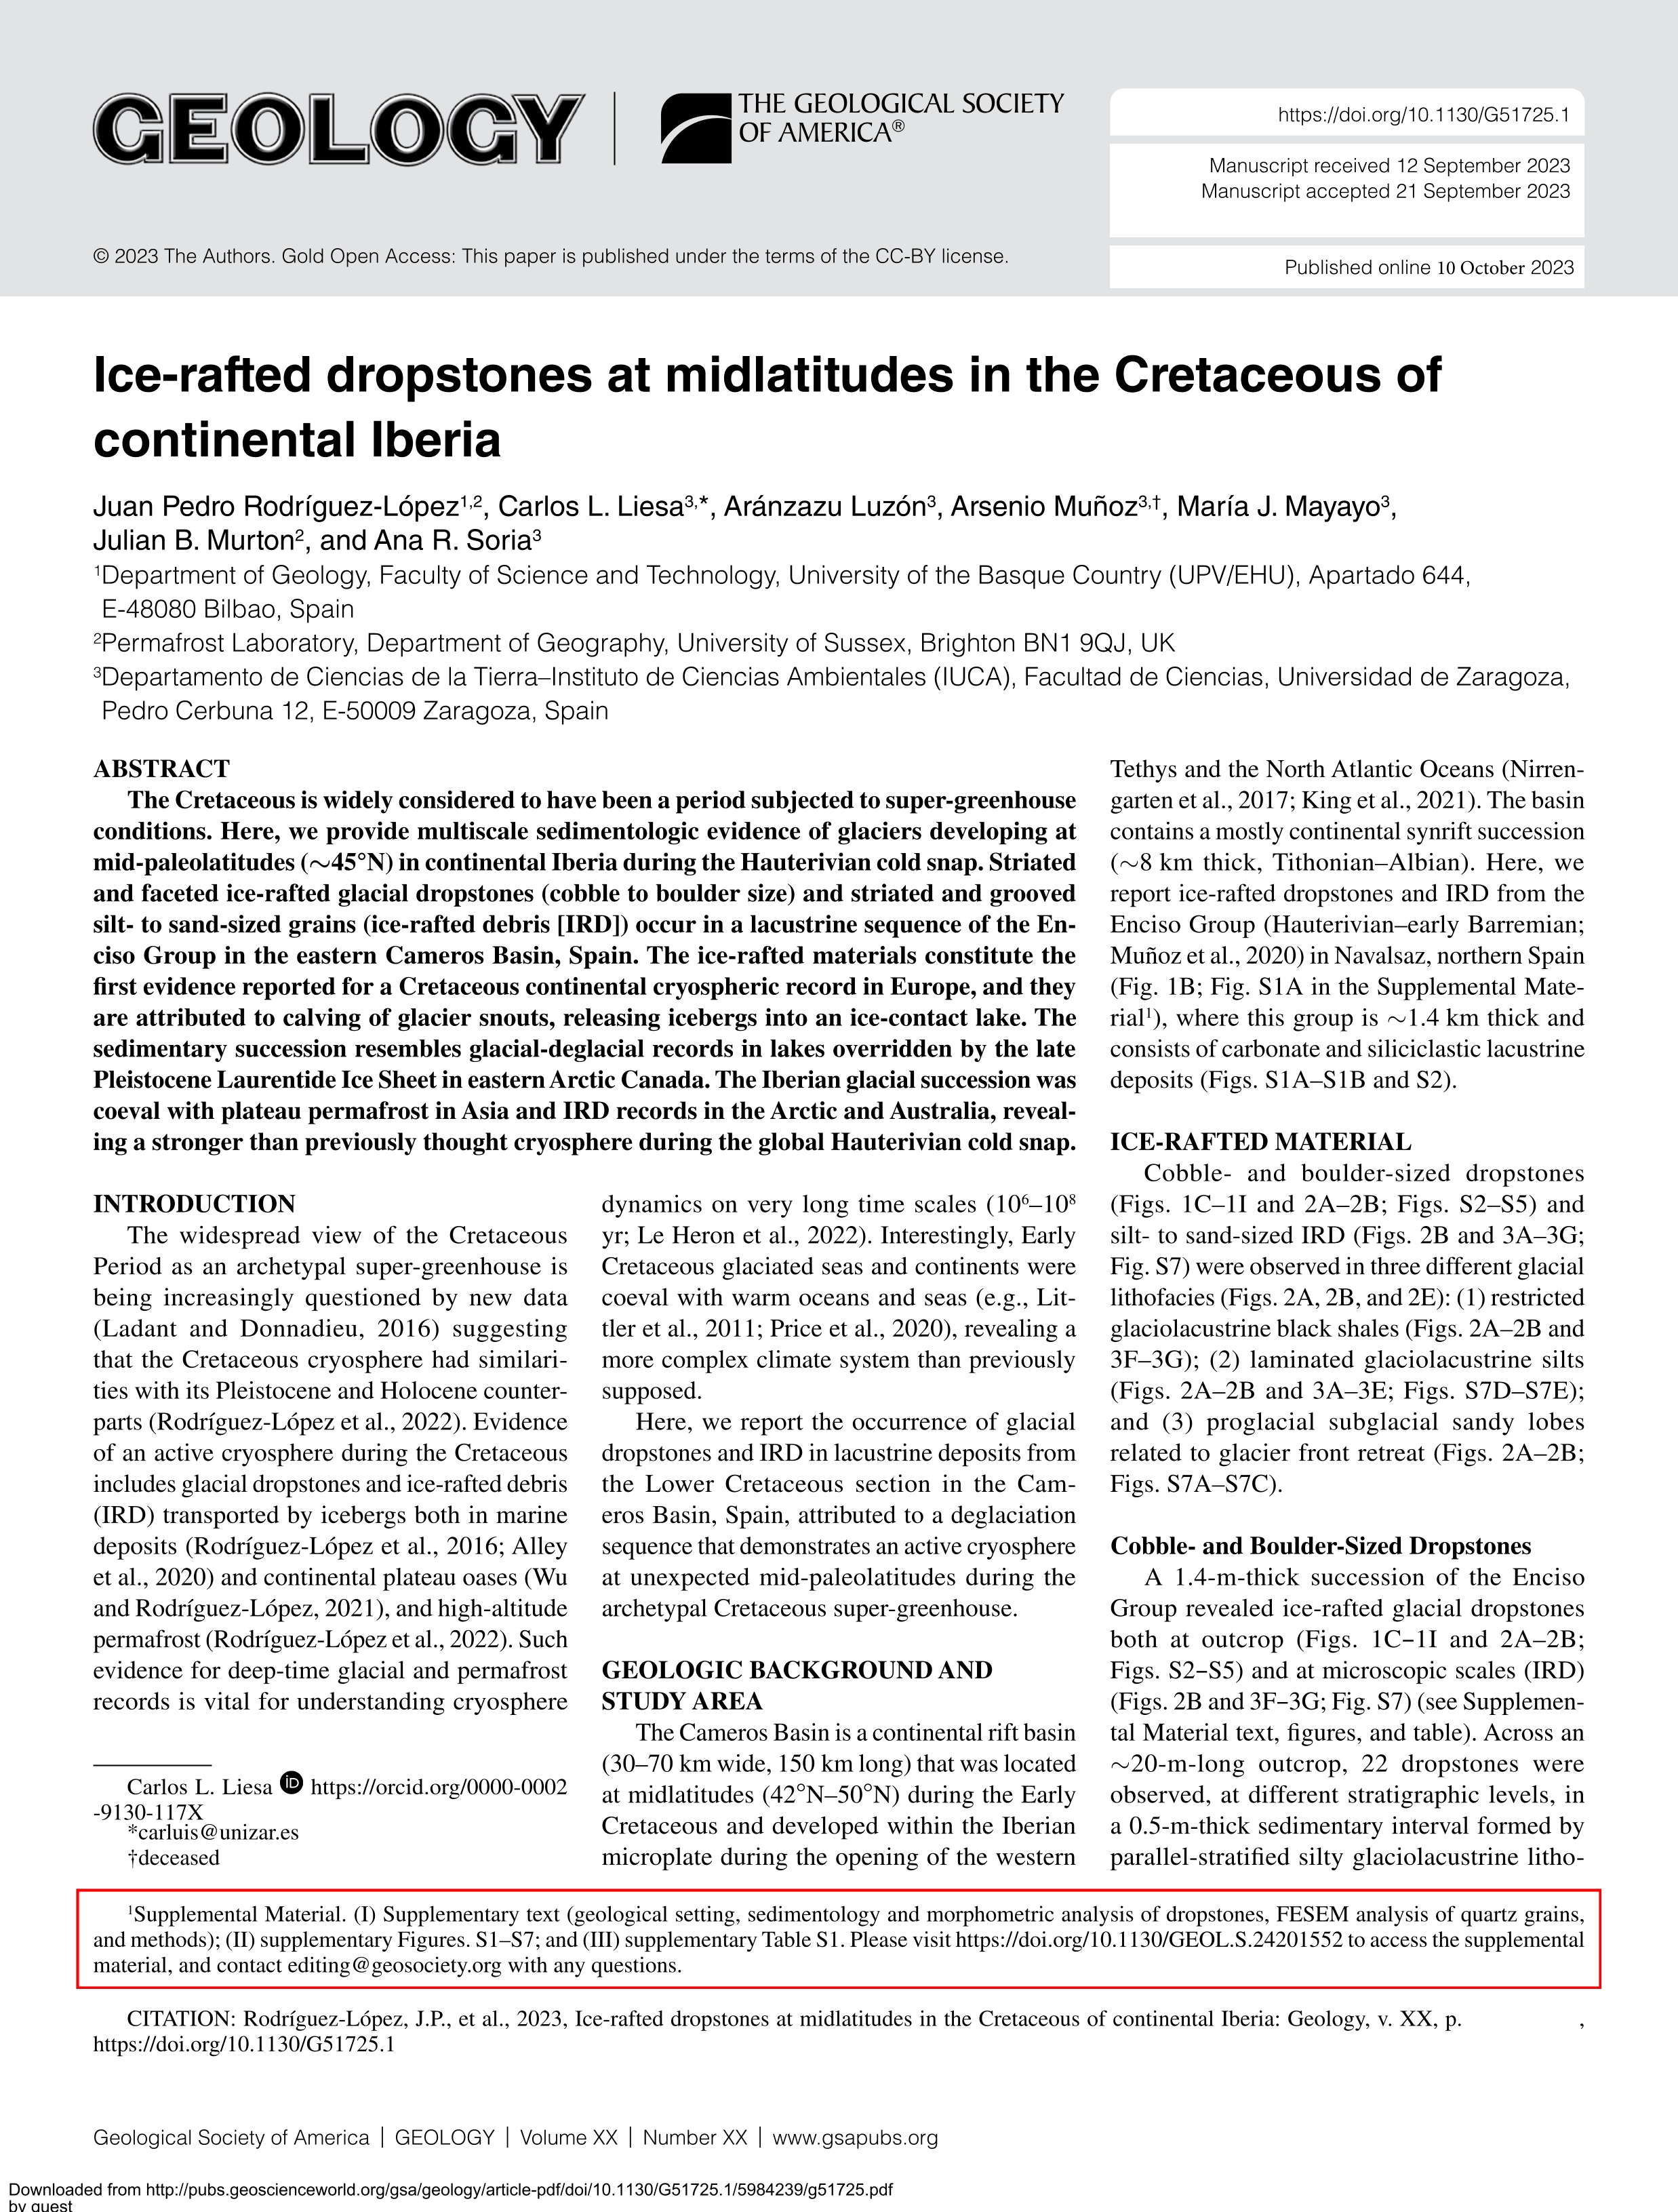 Ice-rafted dropstones at midlatitudes in the Cretaceous of continental Iberia